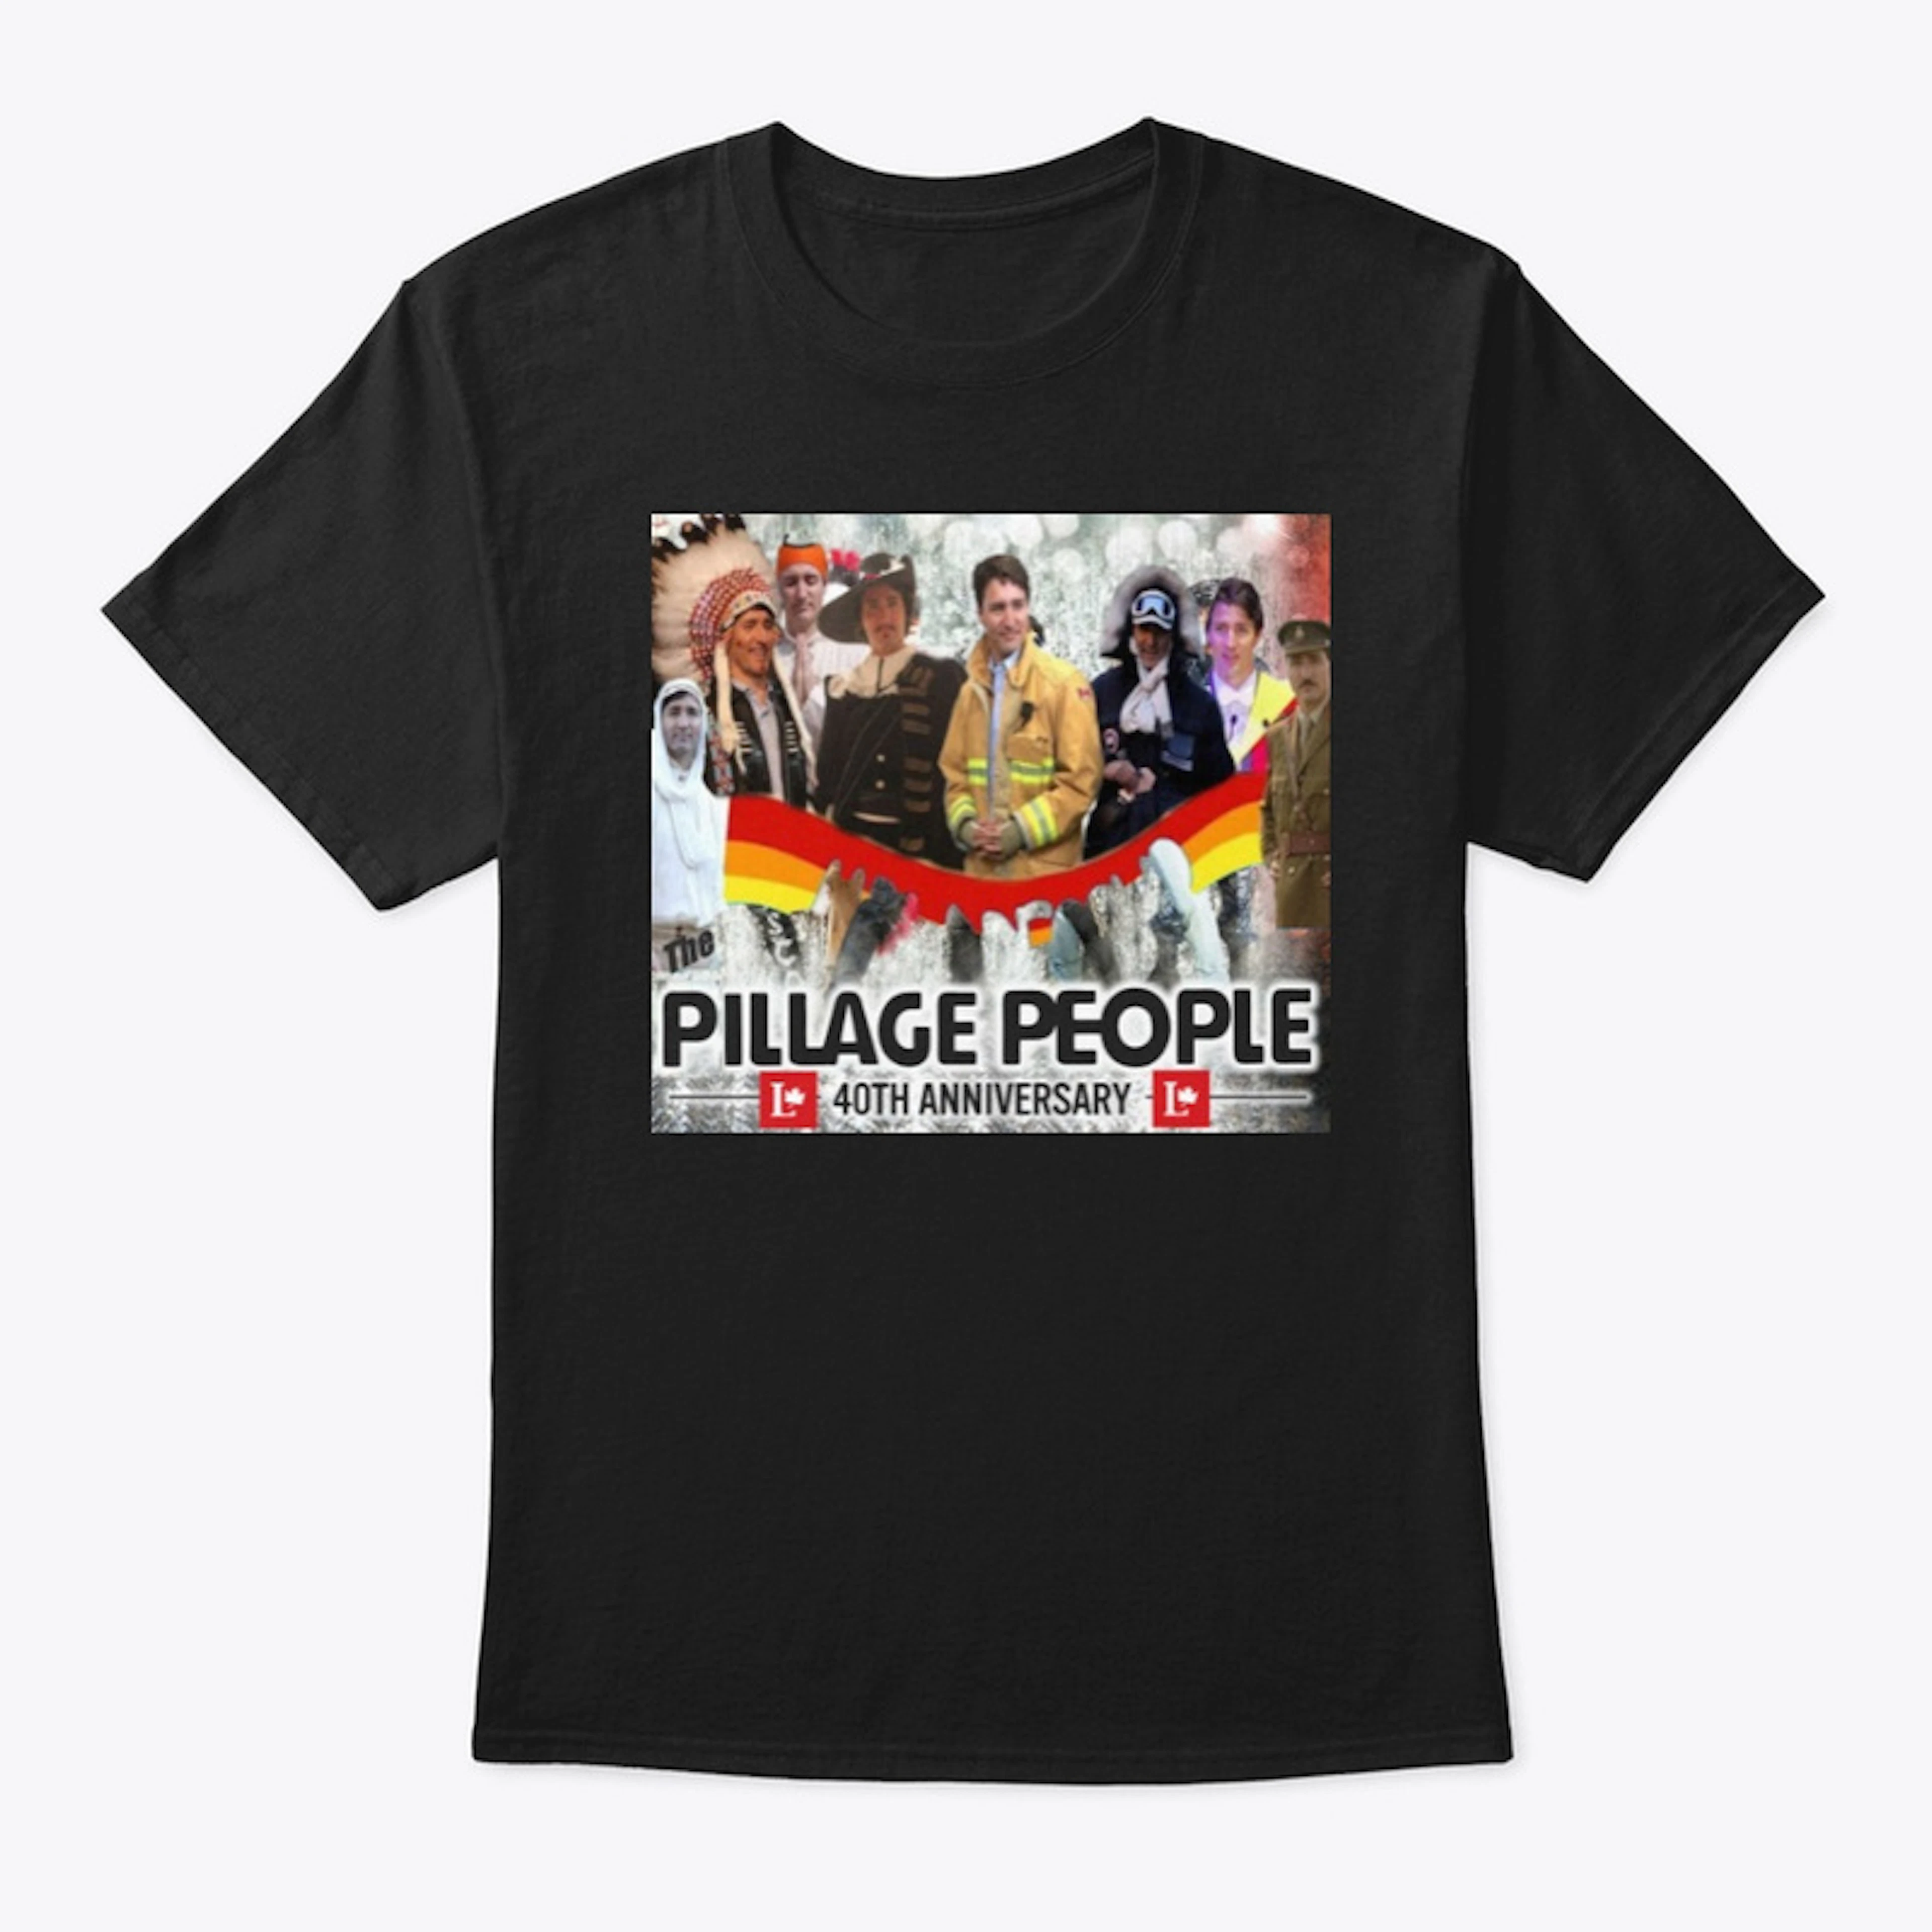 The Pillage People